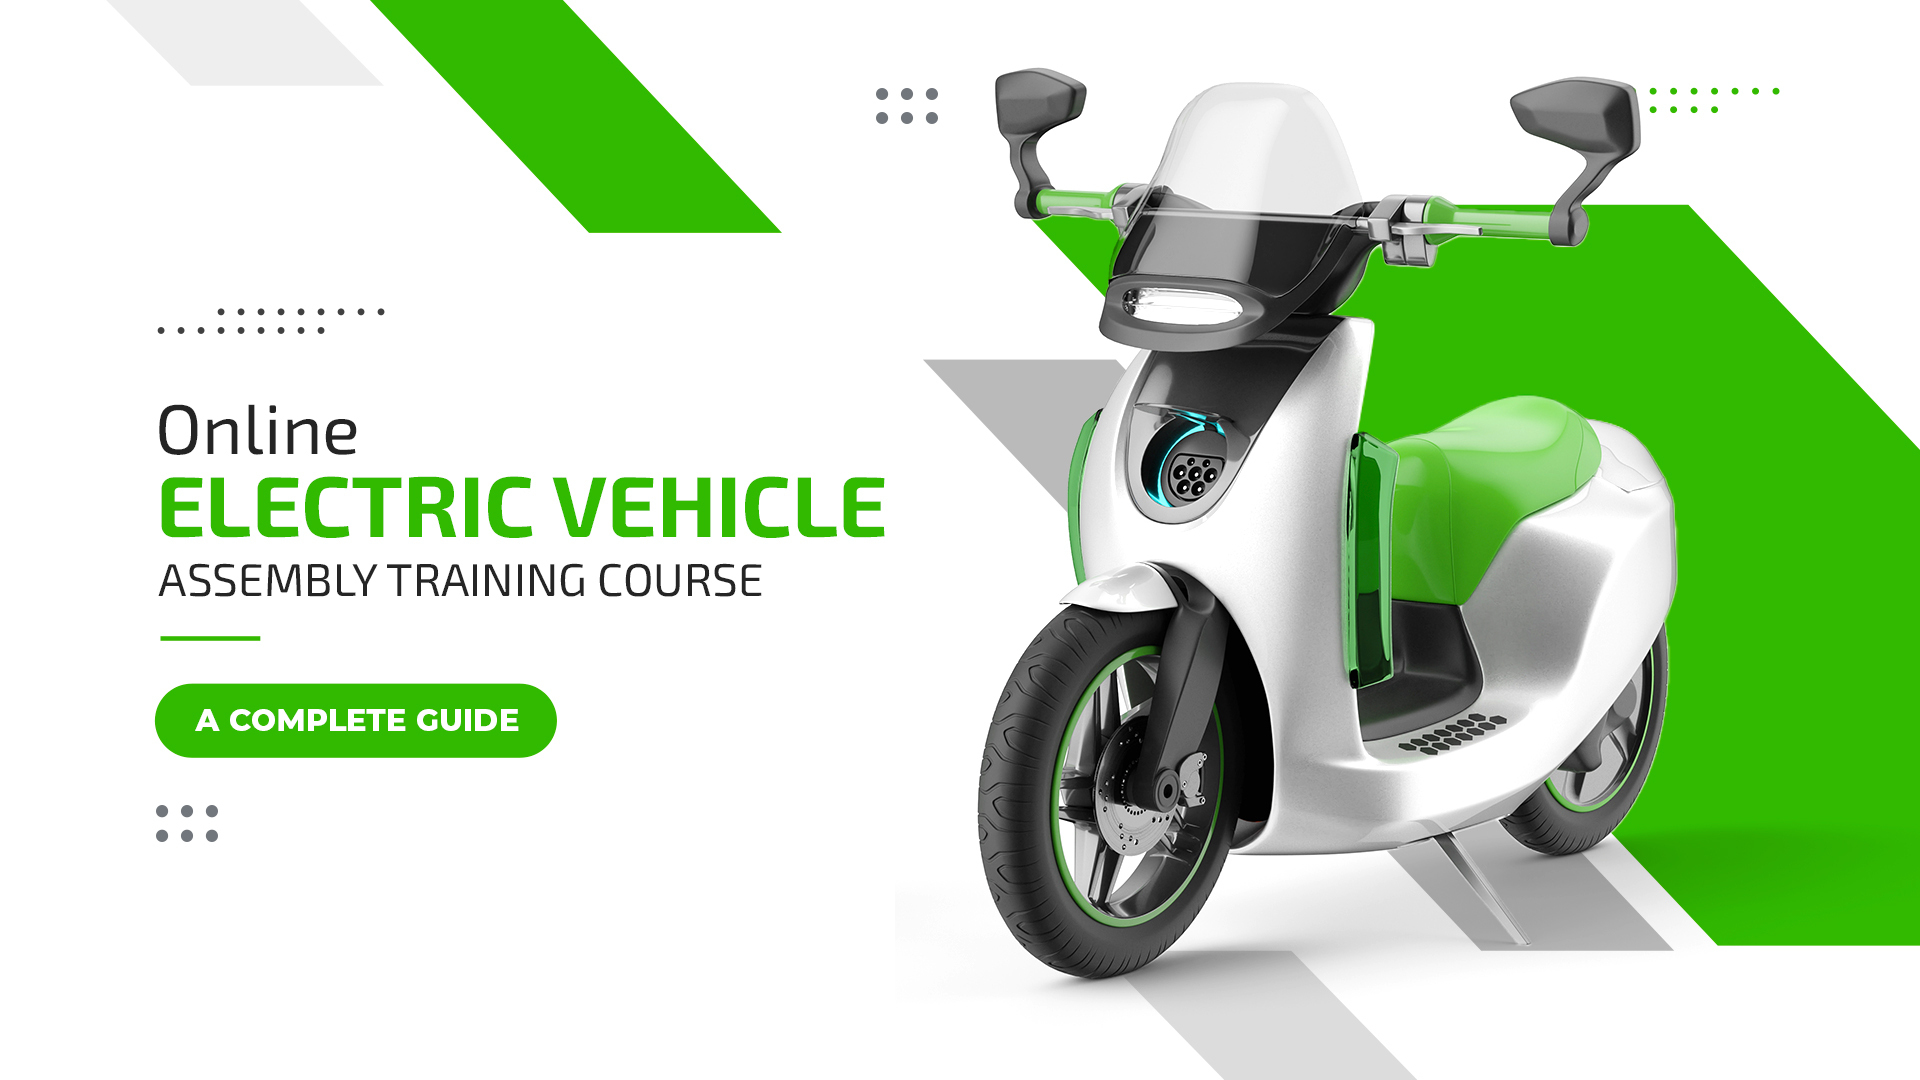 E-Vehicle Assembly Training Course – A Complete Guide for Beginners and Advanced